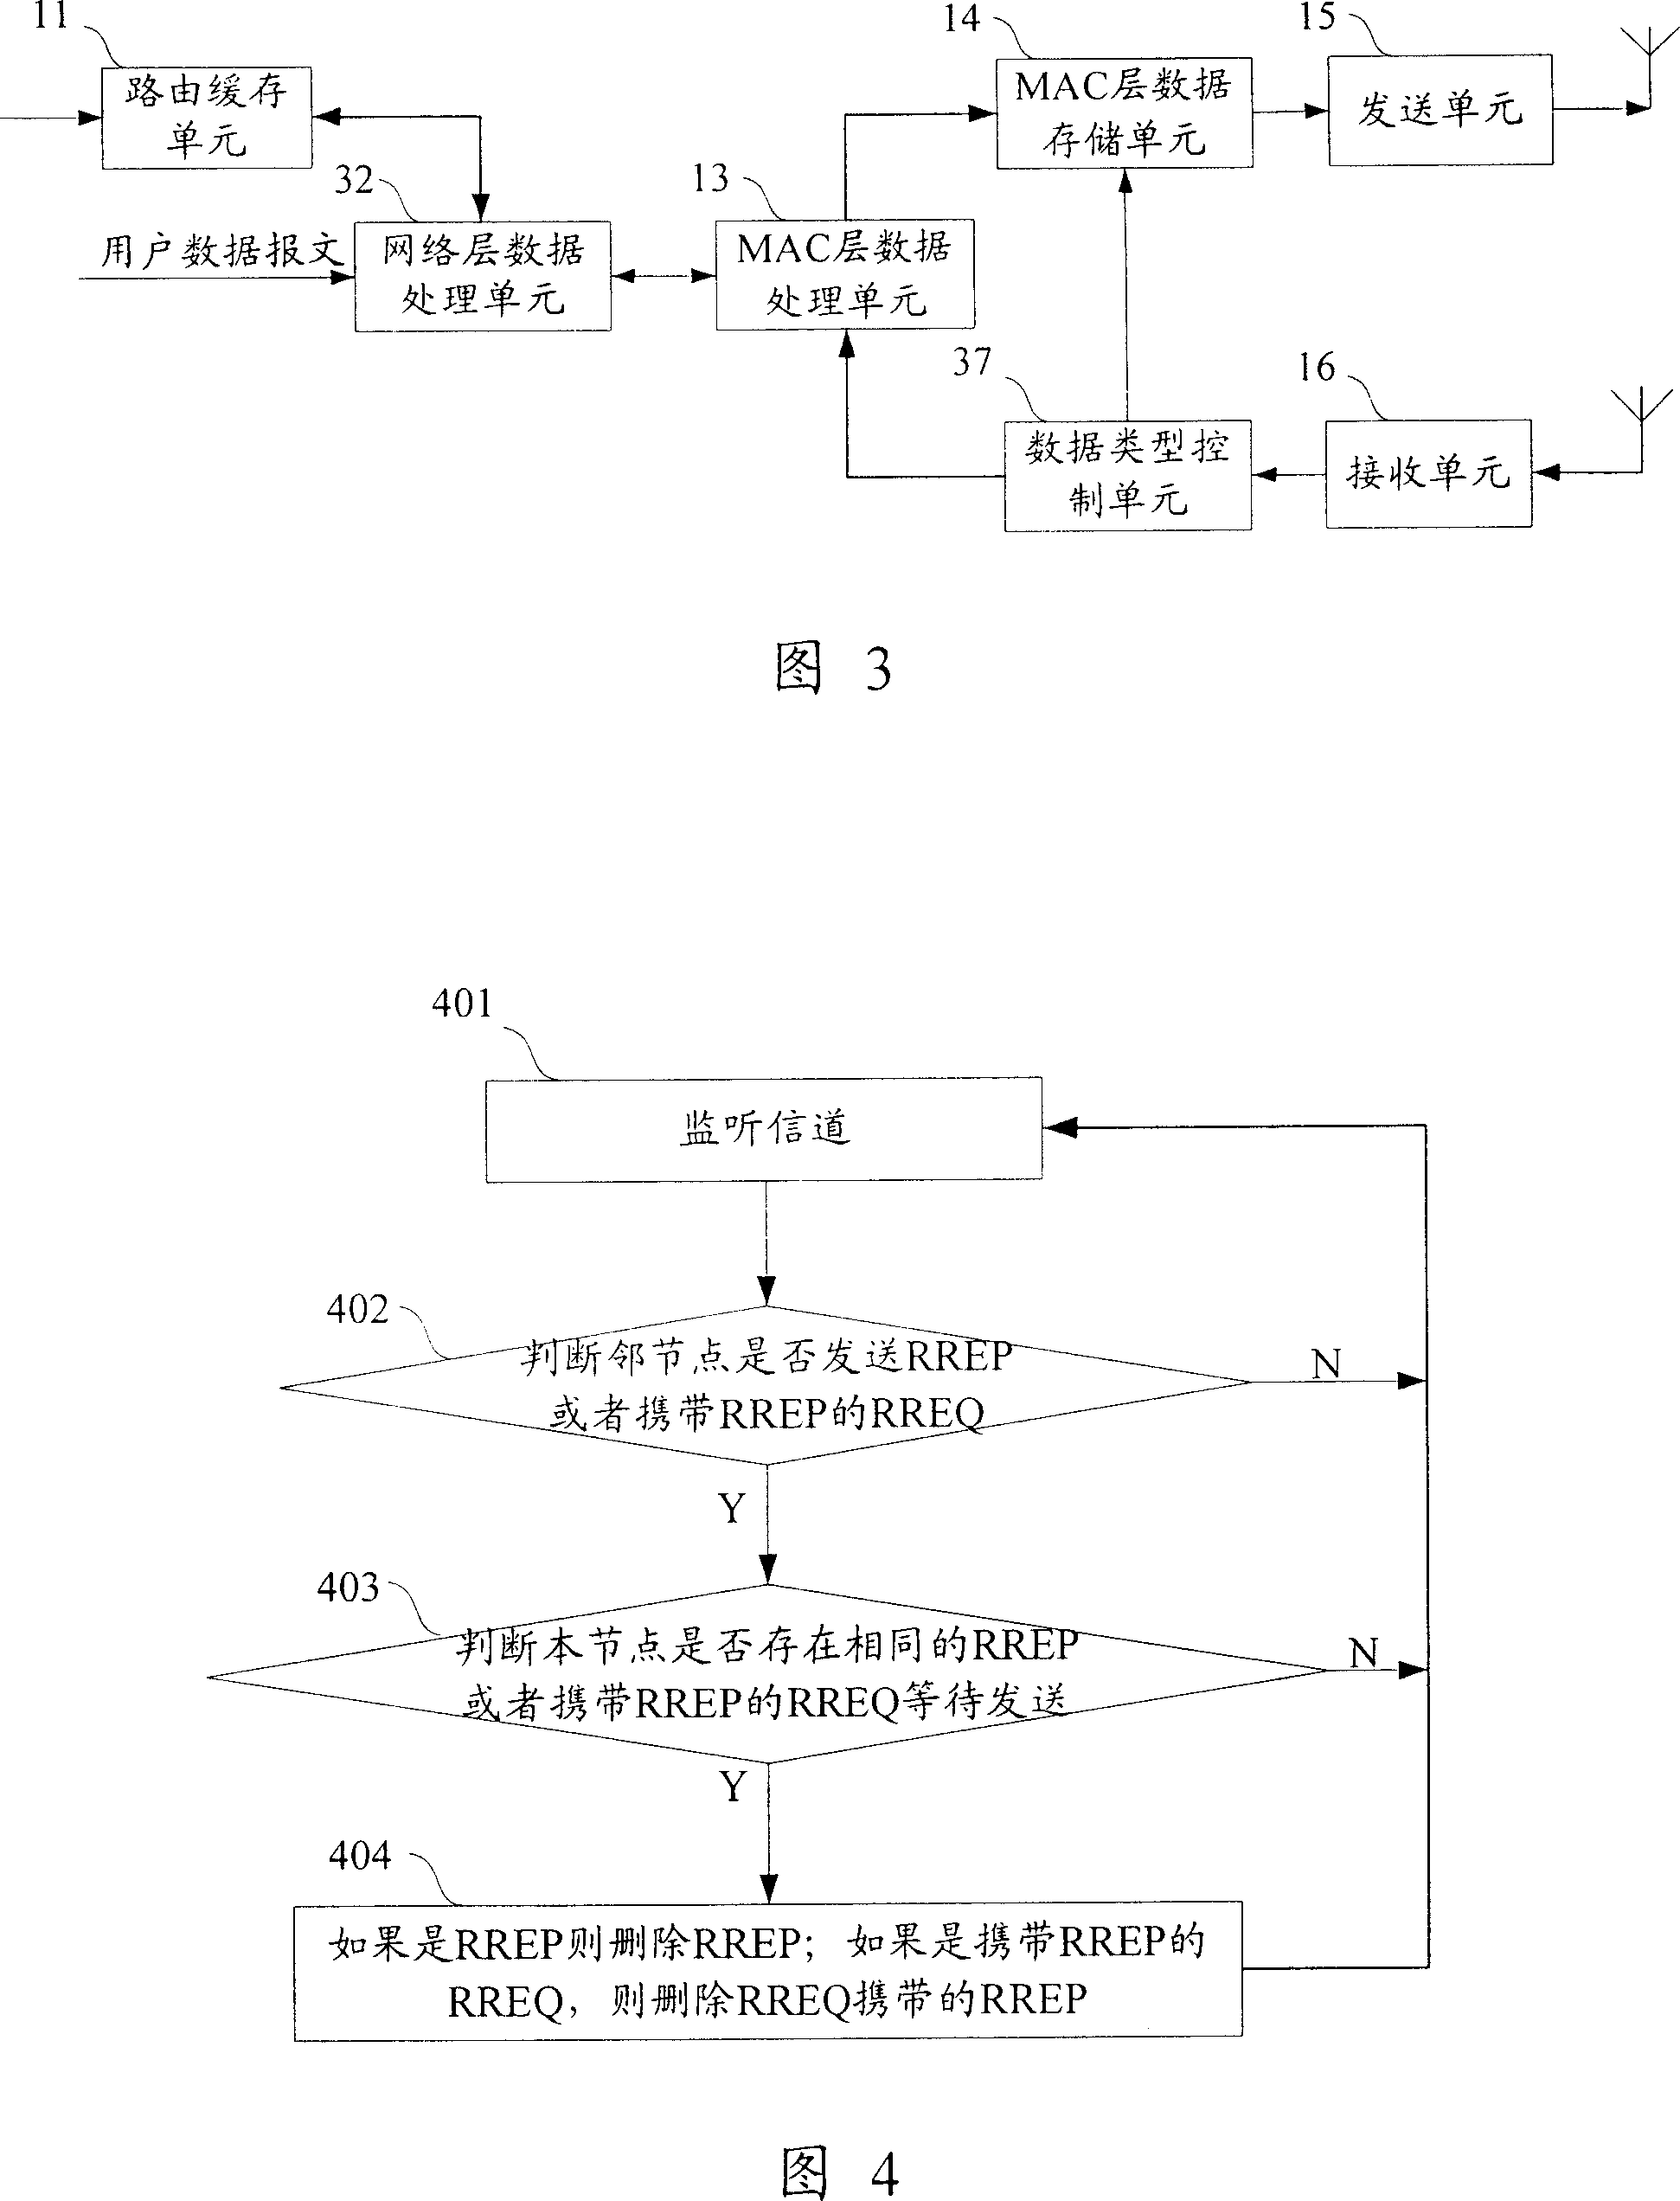 Method and apparatus of quick route setting-up